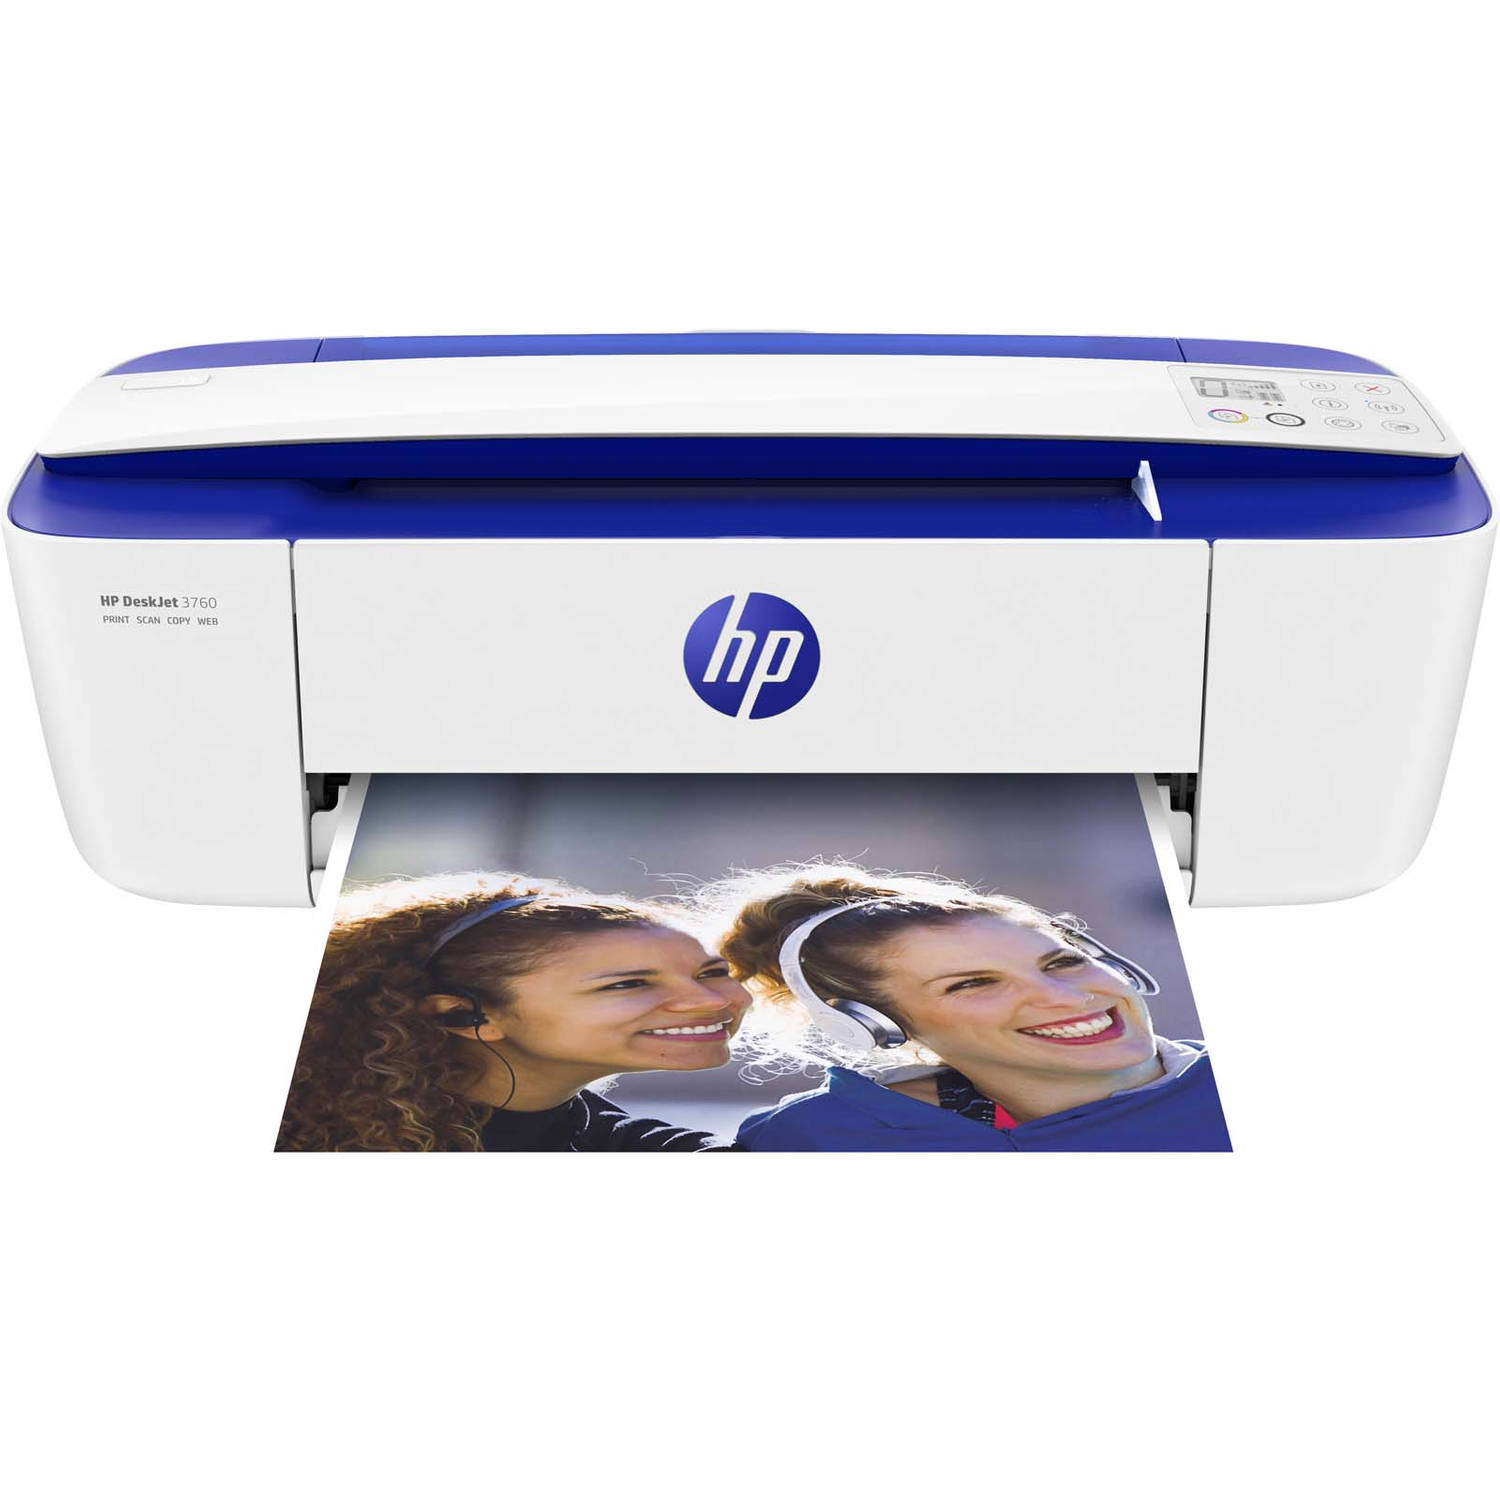 HP 3760 all-in-one - Instant Ink Blokker